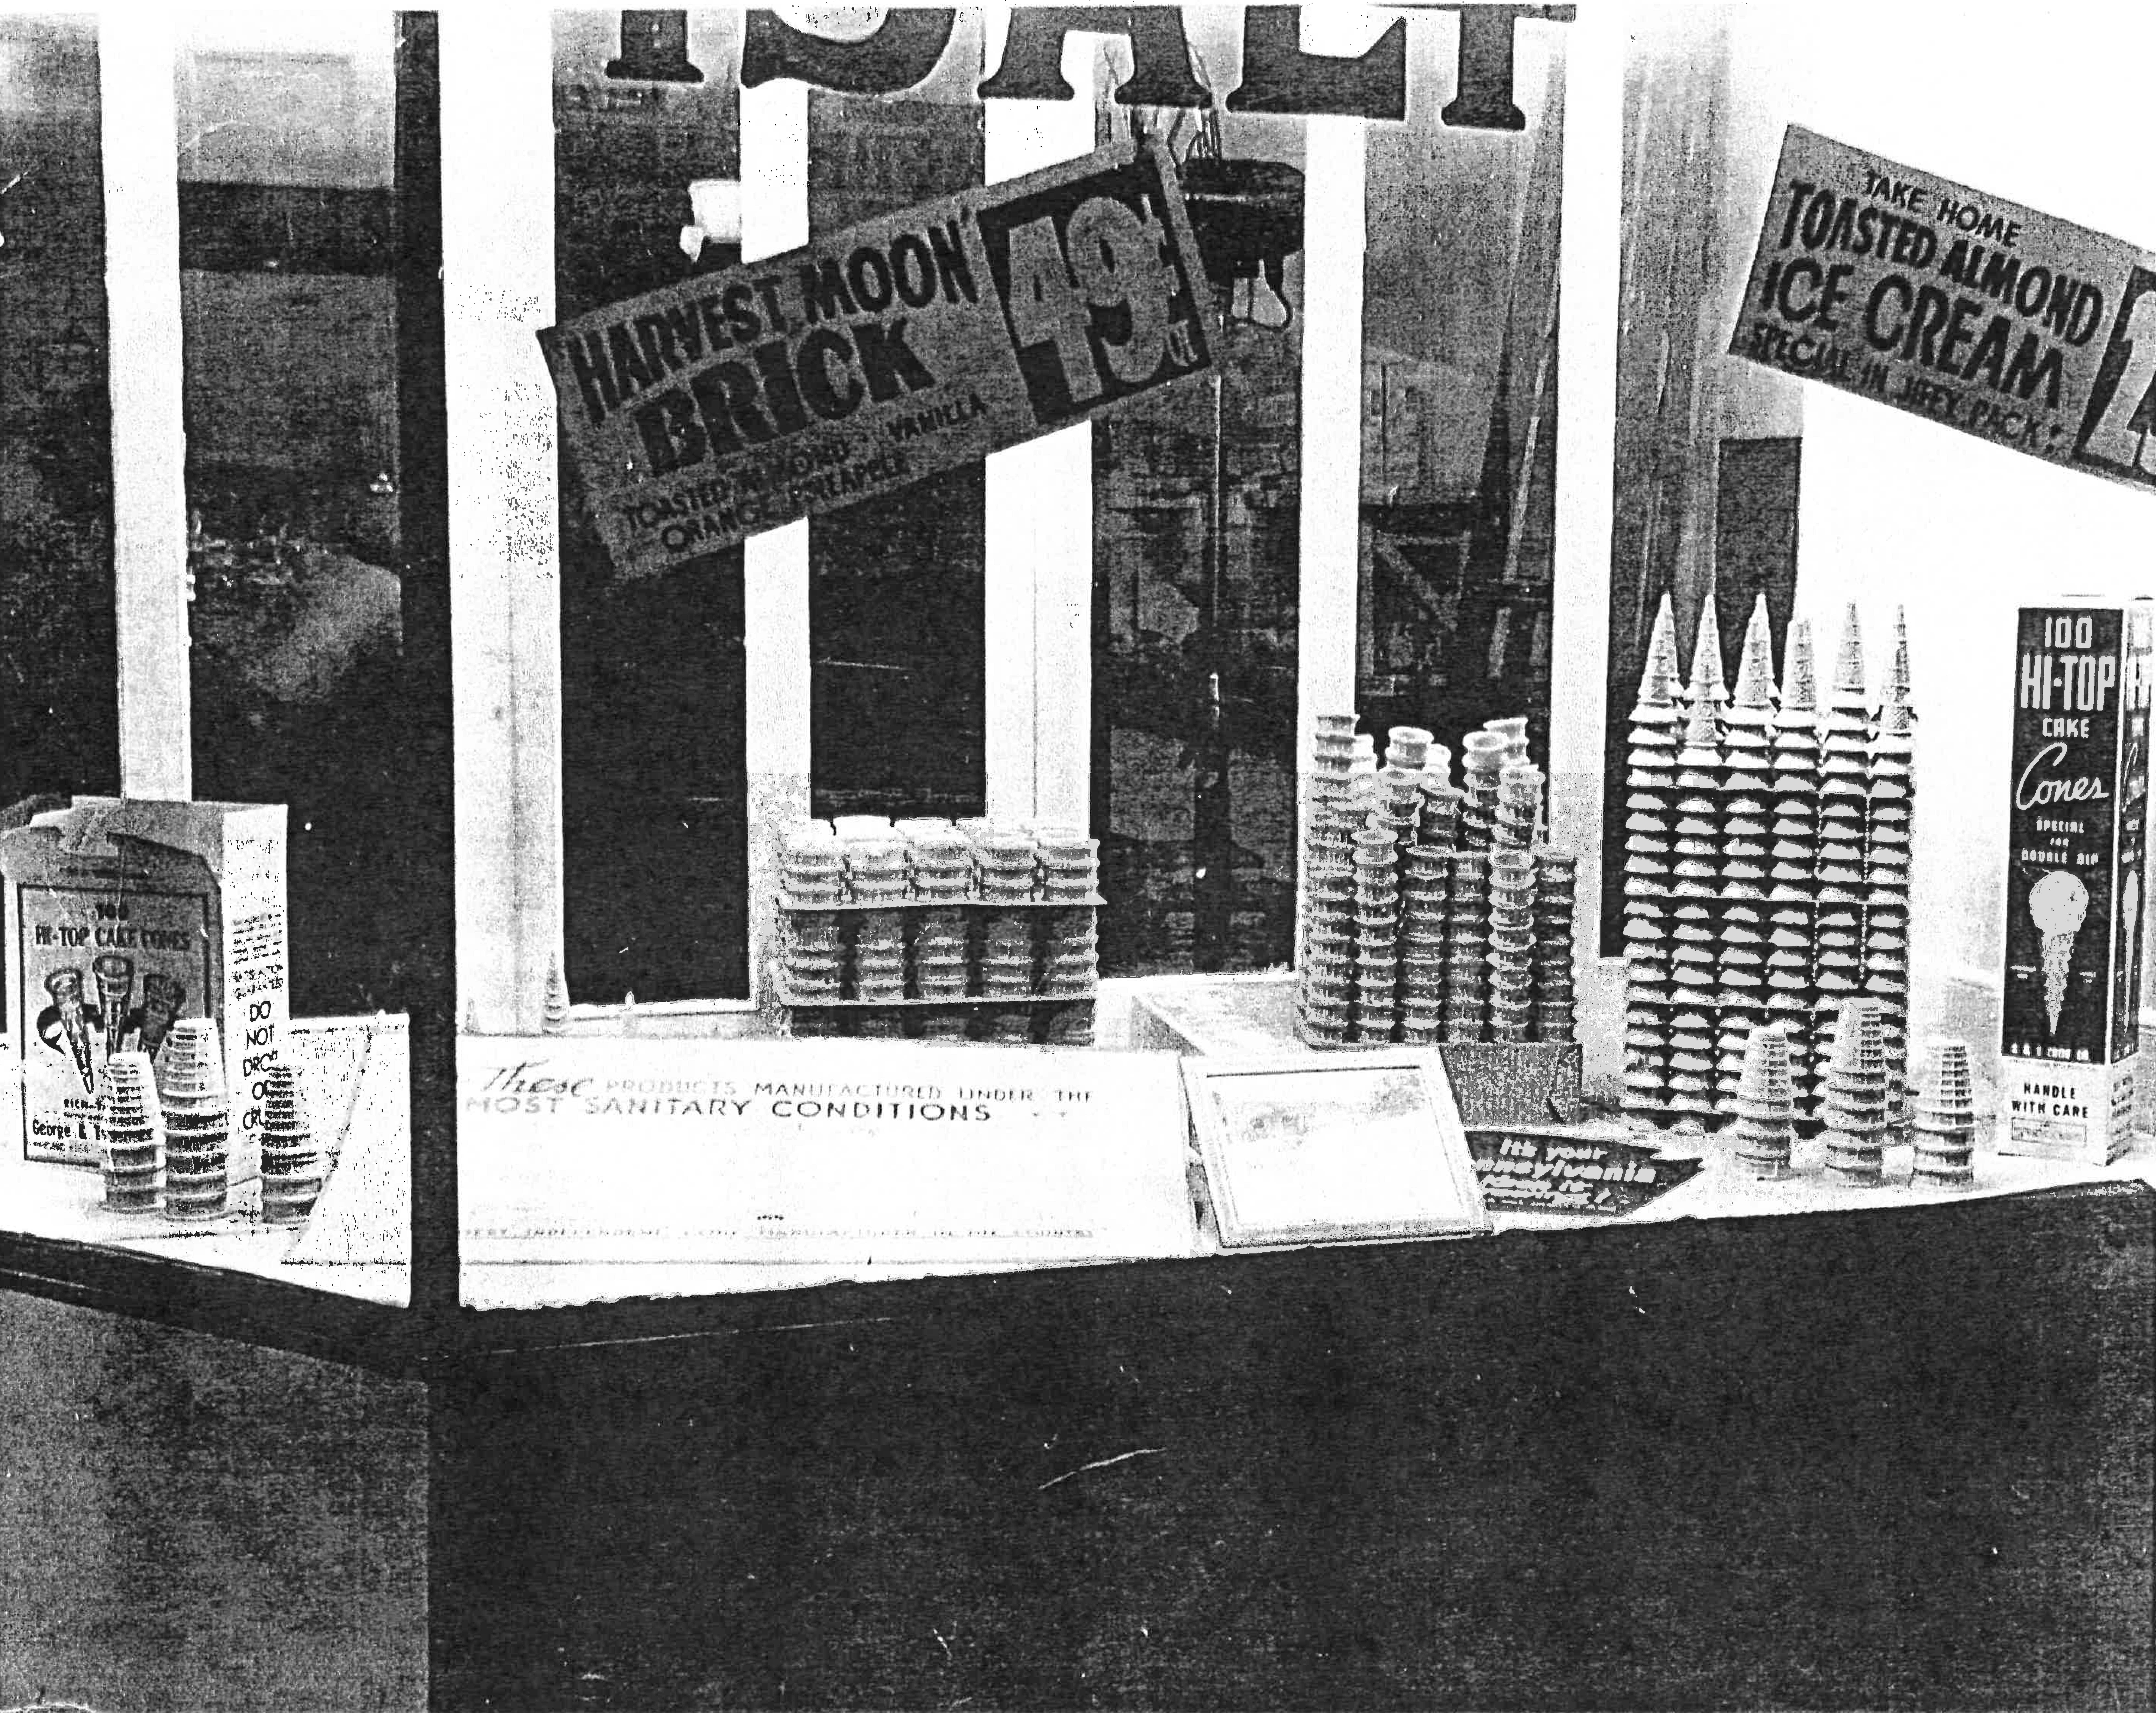 Photo of a display in an Isaly store on West State Street in Sharon, PA. In those days, we made Best cake pointed cones, high top pointed cones, high Joy pointed cones, and a flat-bottomed cut. In the middle of the display area, there is a picture of the rebuilt Joy Cone Company facility located South Irvine Avenue.